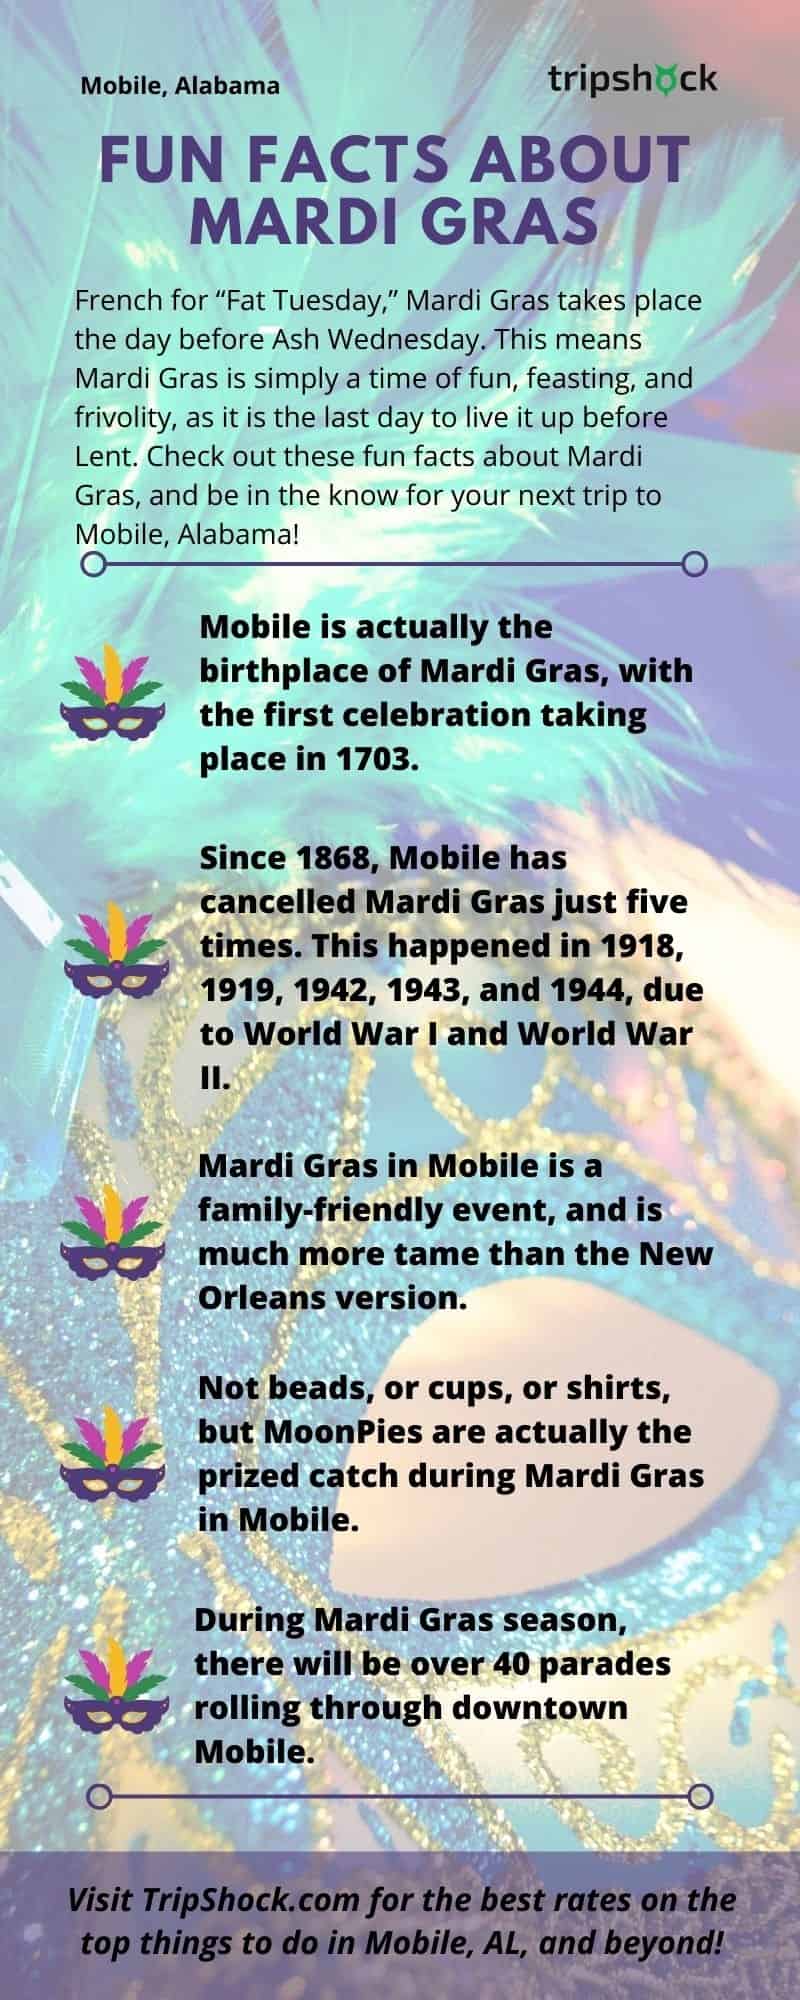 Fun facts about Mardi Gras in Downtown Mobile, AL